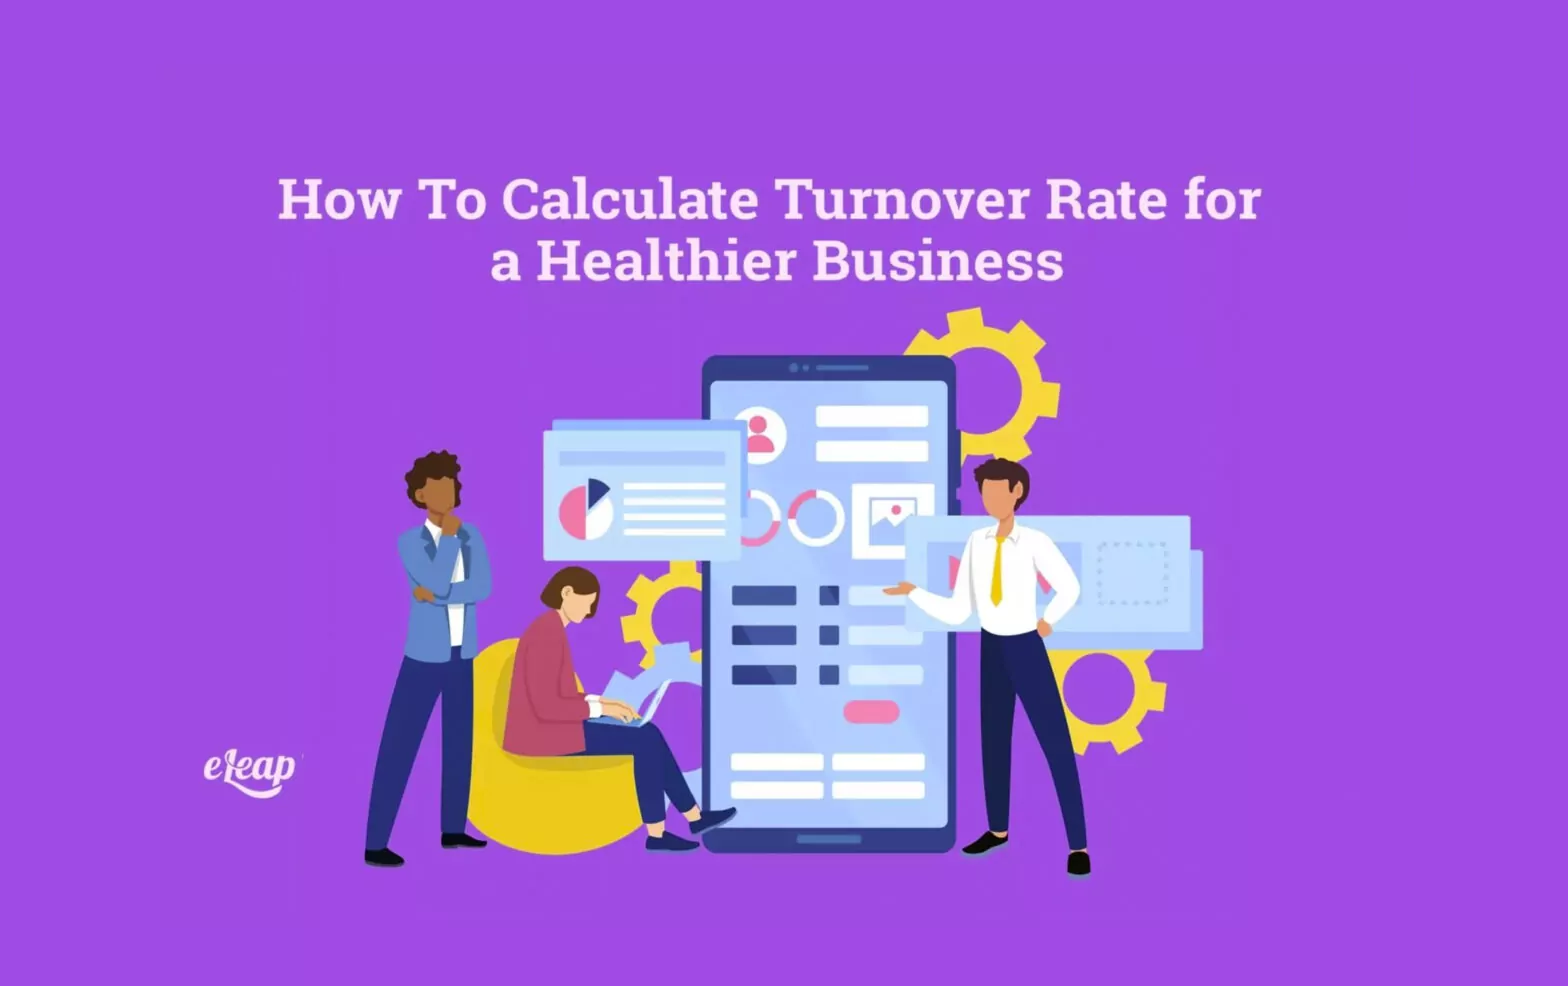 How To Calculate Turnover Rate for a Healthier Business